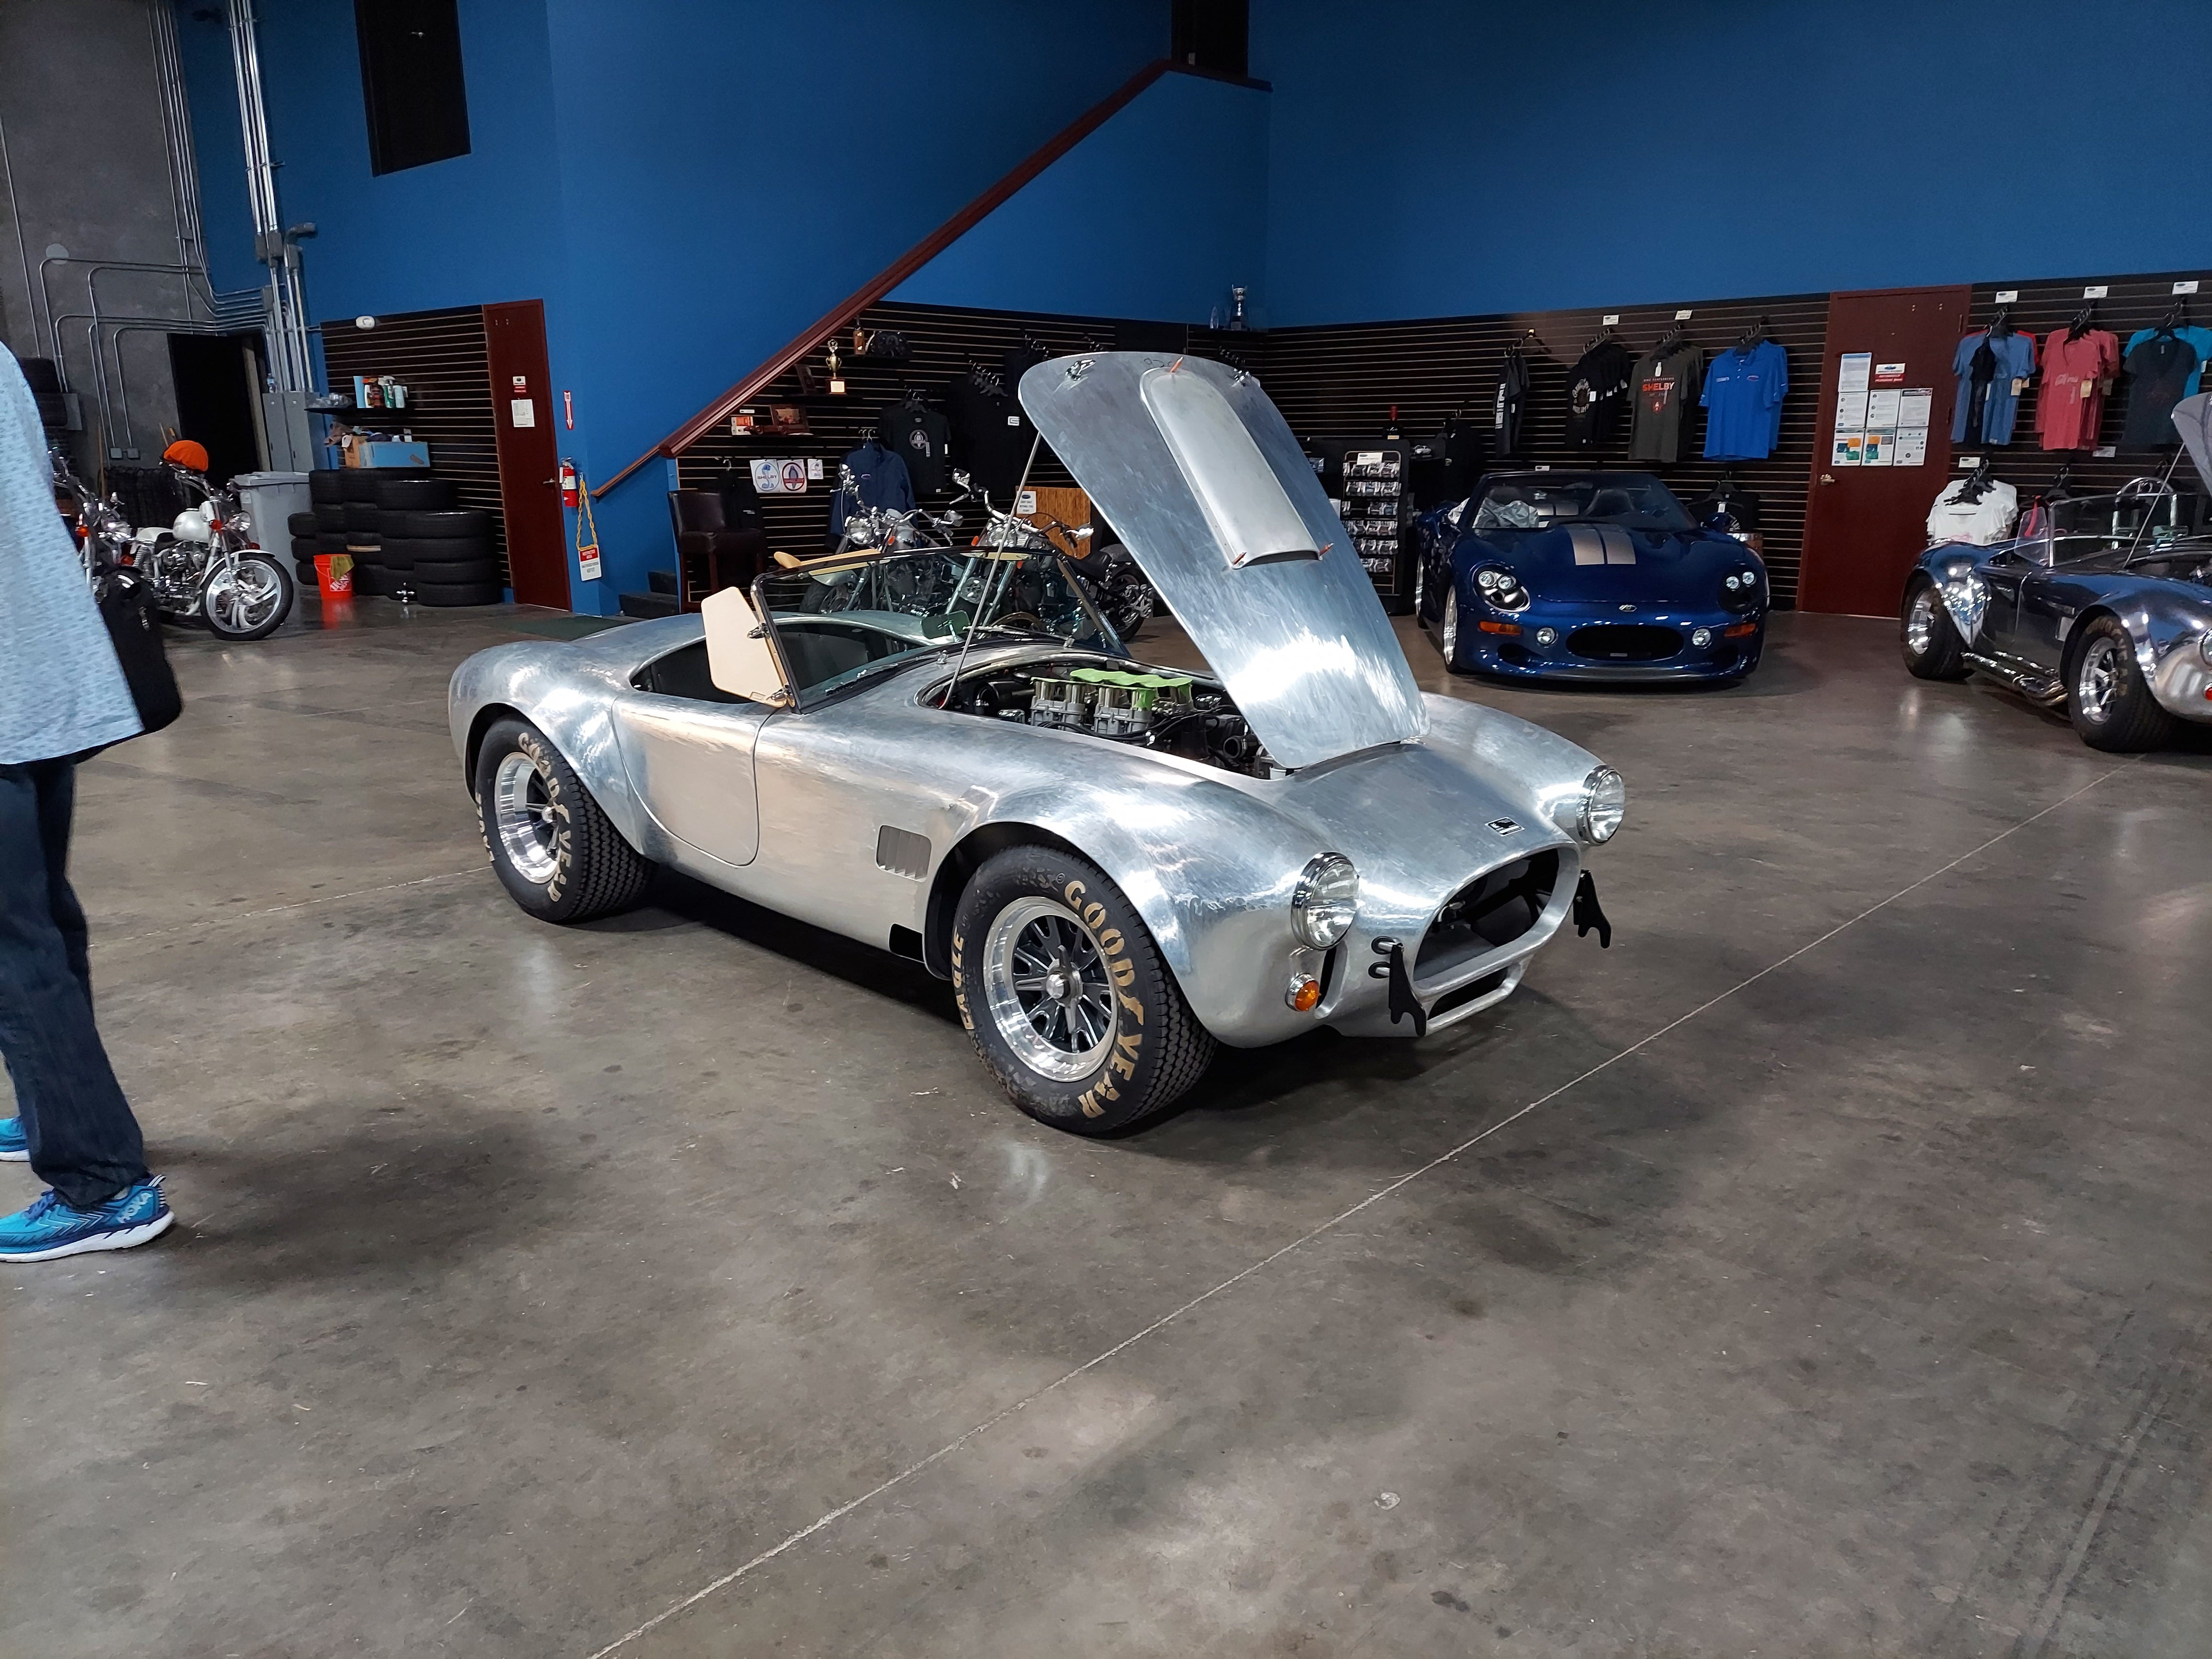 1965 Shelby CSX 3000 series MSO Cobra straight off the factory floor